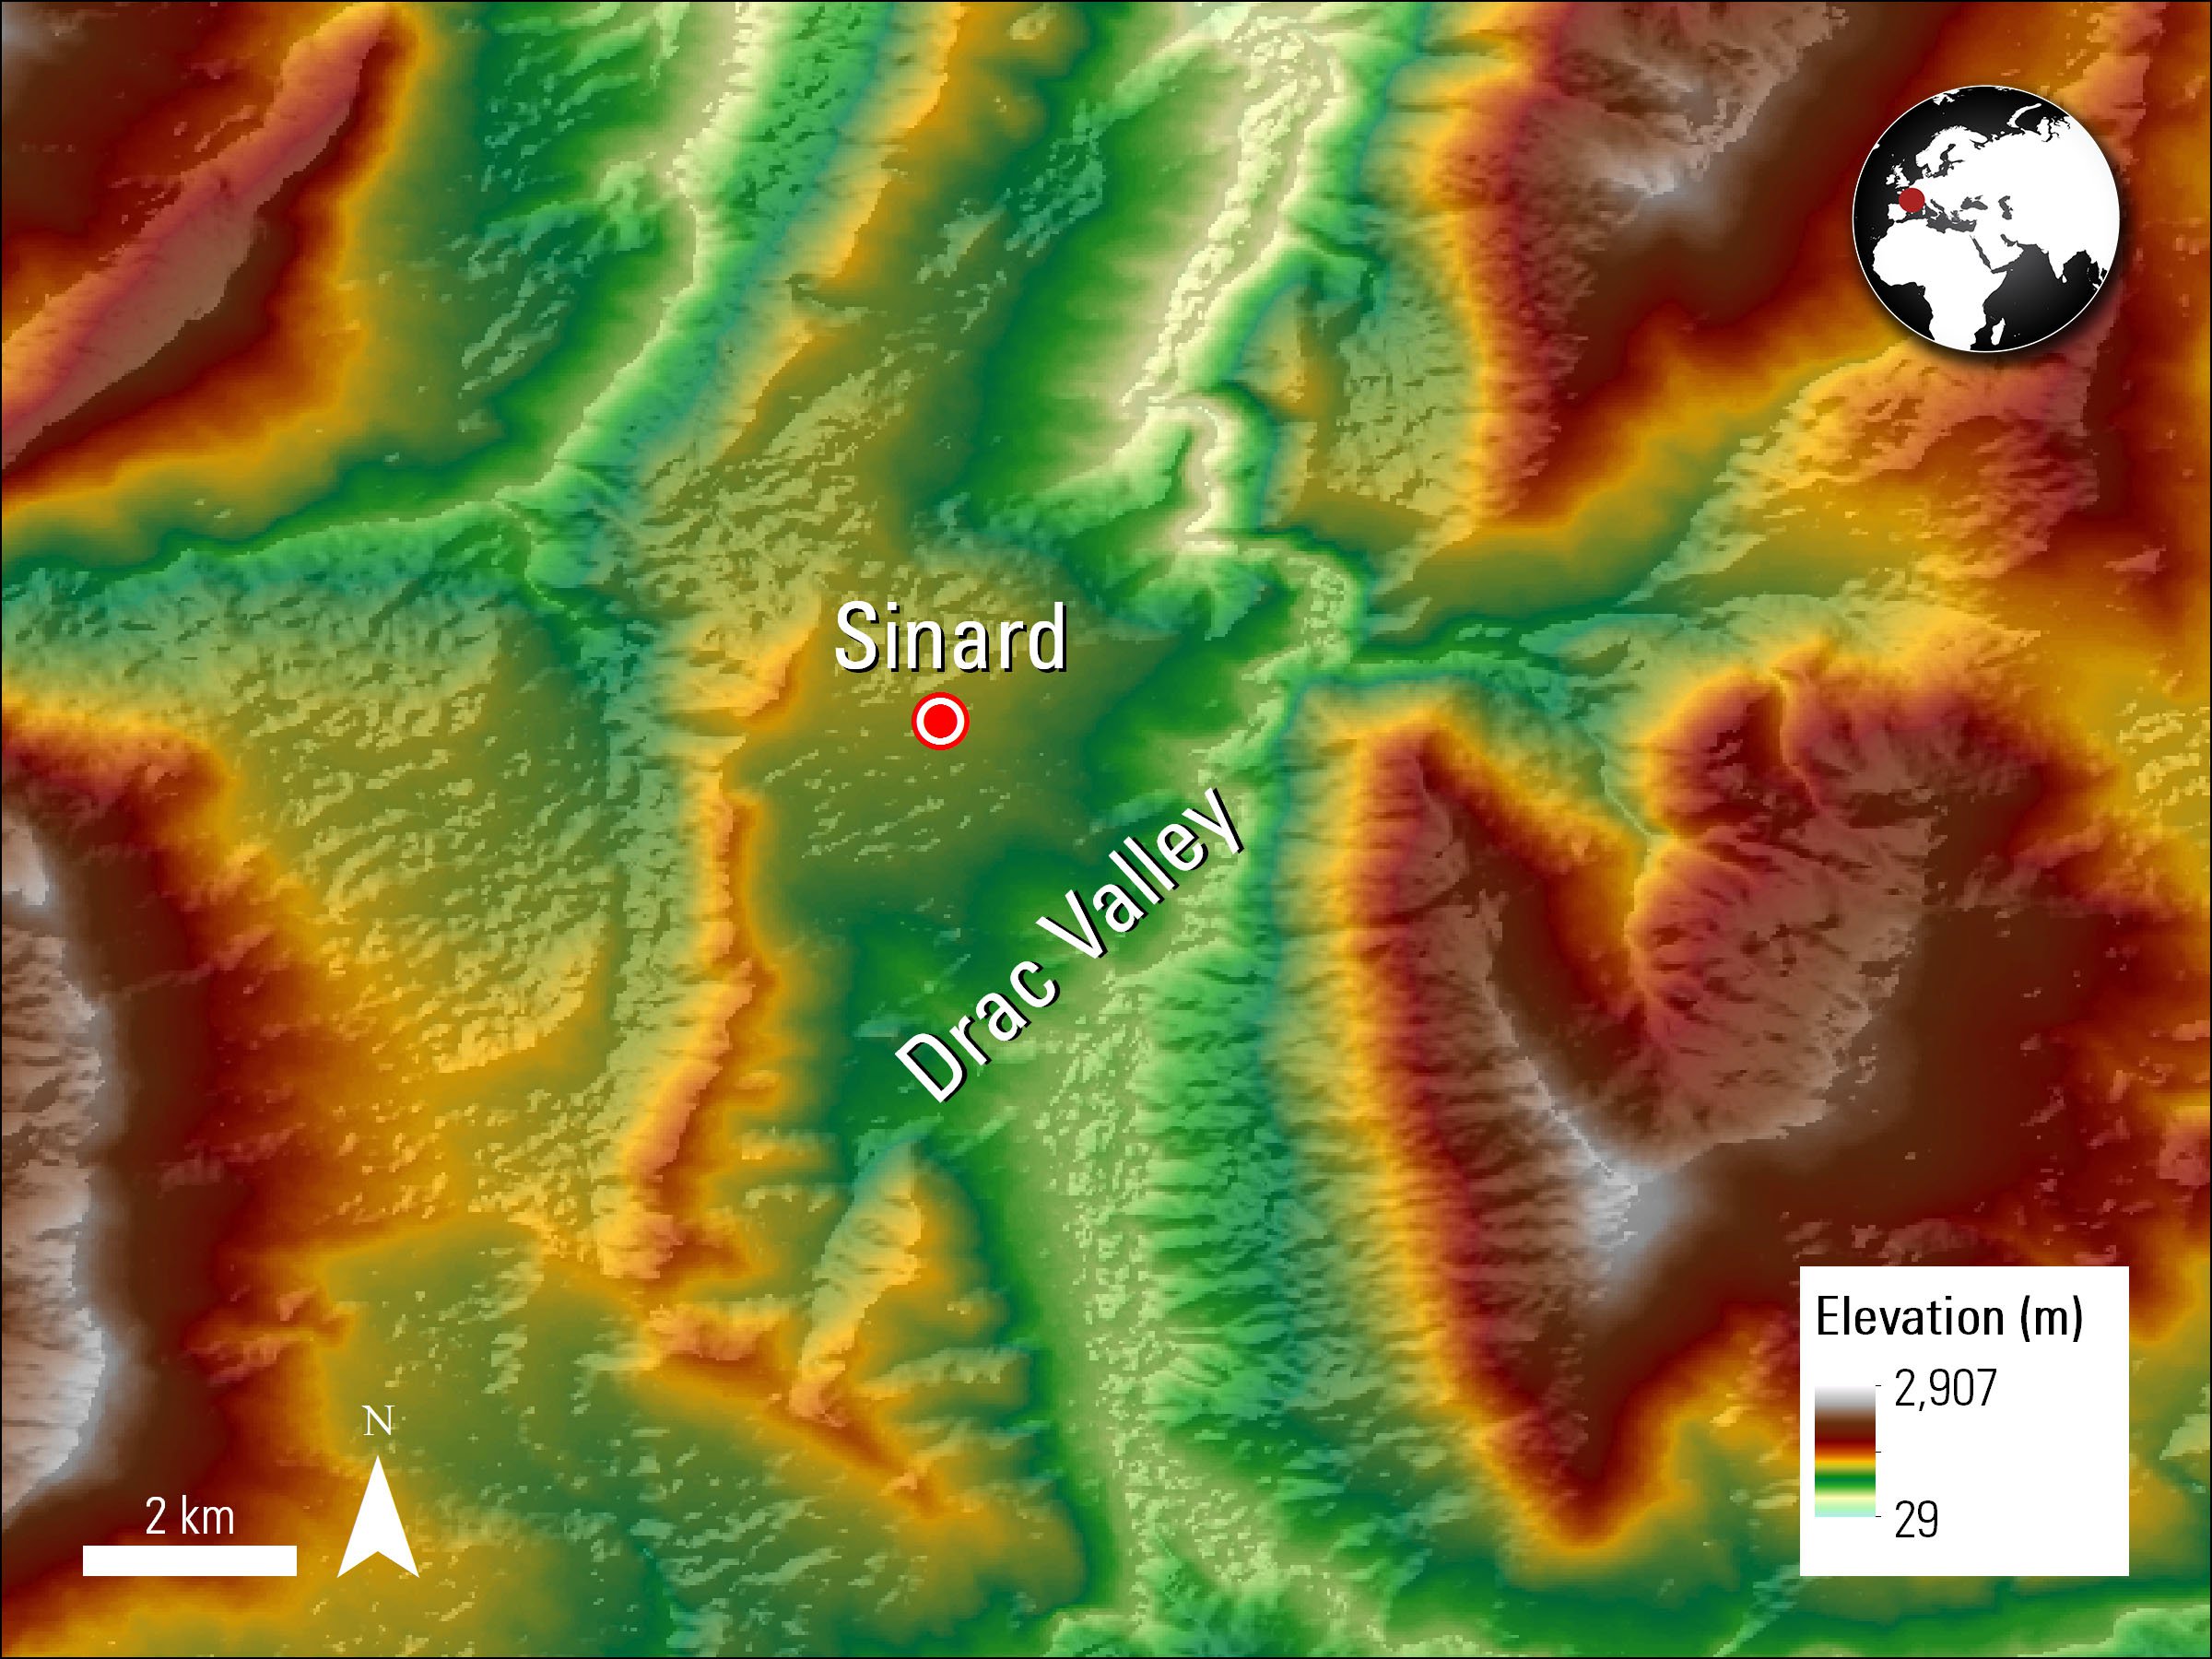 Terra ASTER elevation data over Sinard, France and the French Alps.